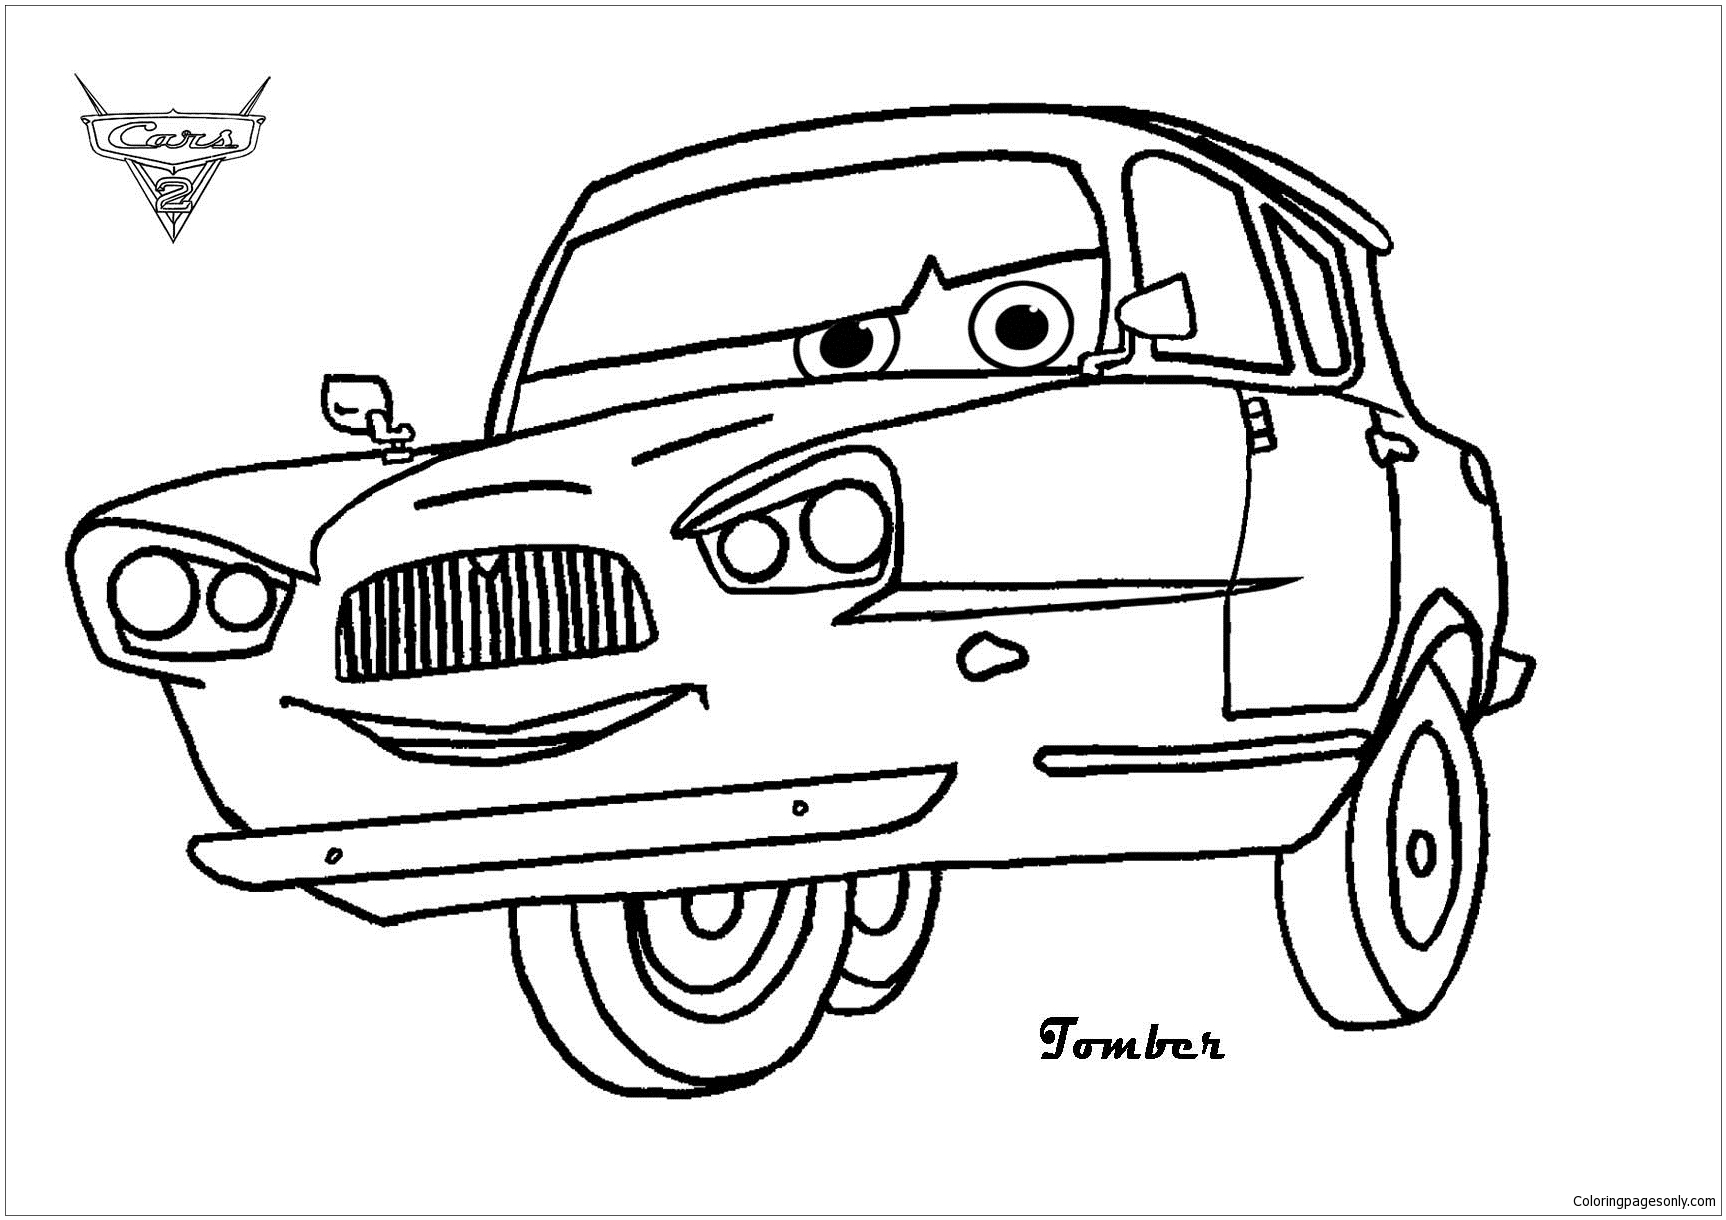 Disney Cars 2 5 Coloring Page